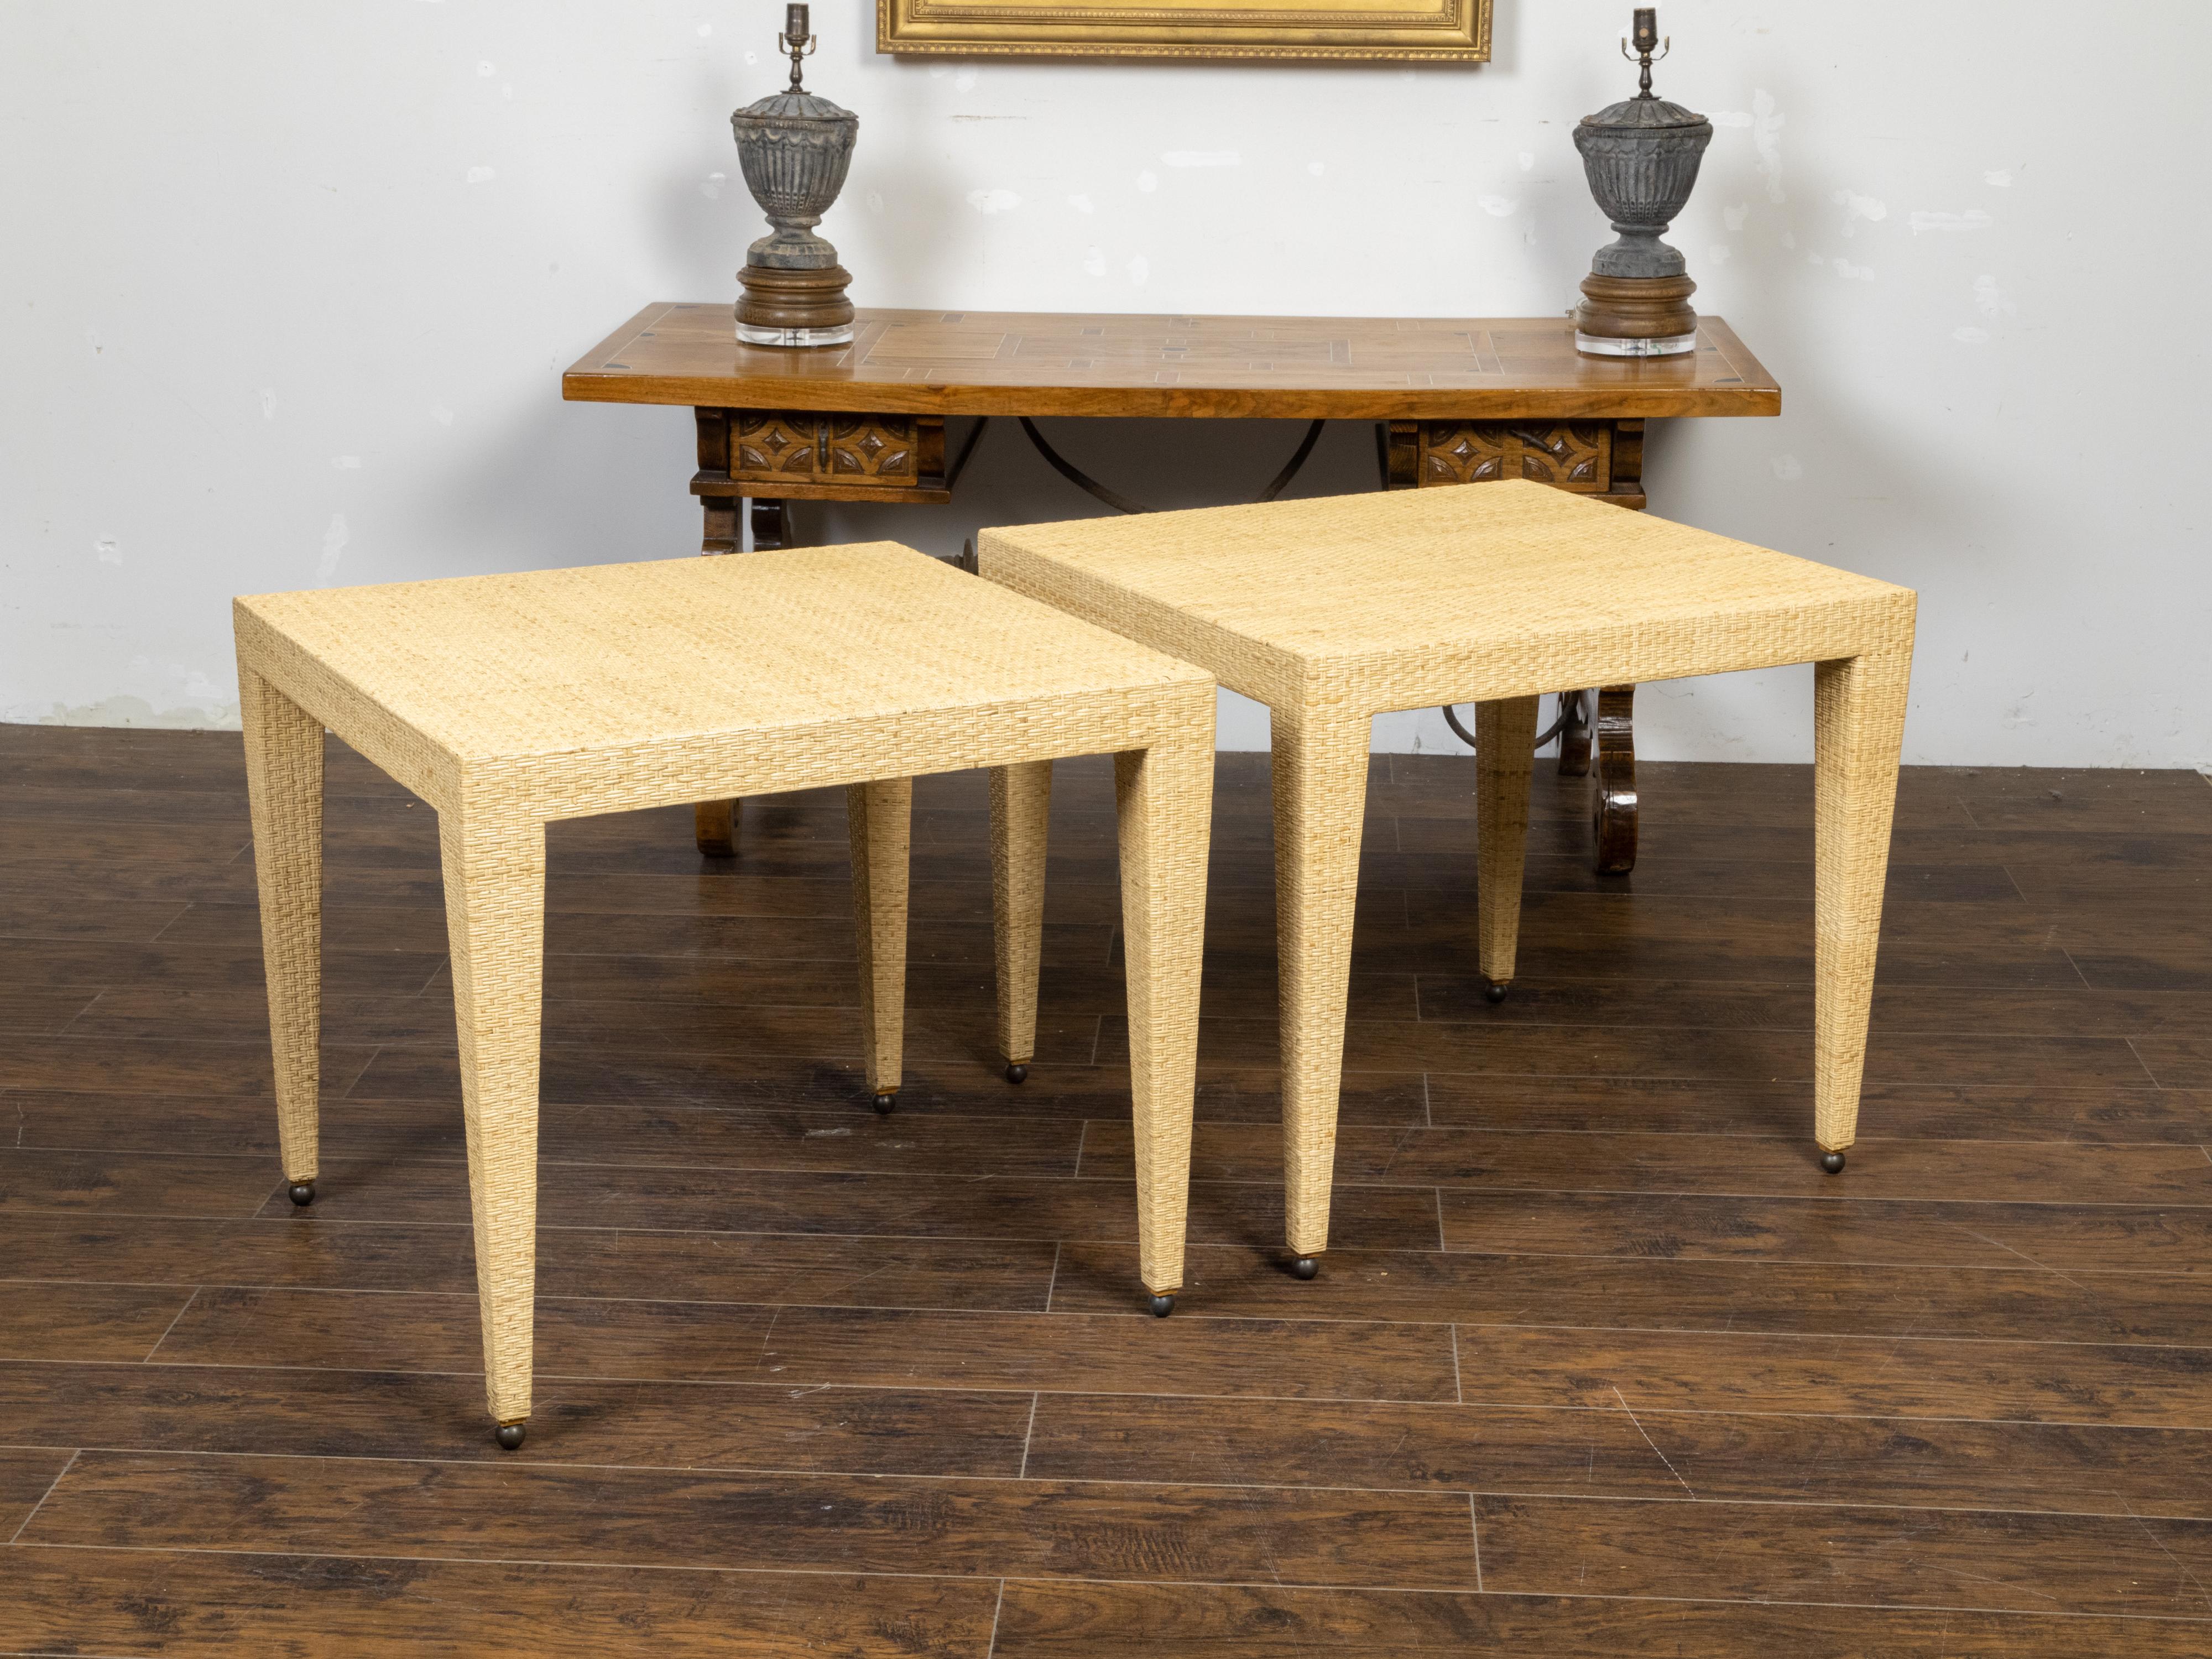 American Pair of Baker Furniture Midcentury Wicker Side Tables with Tapered Legs For Sale